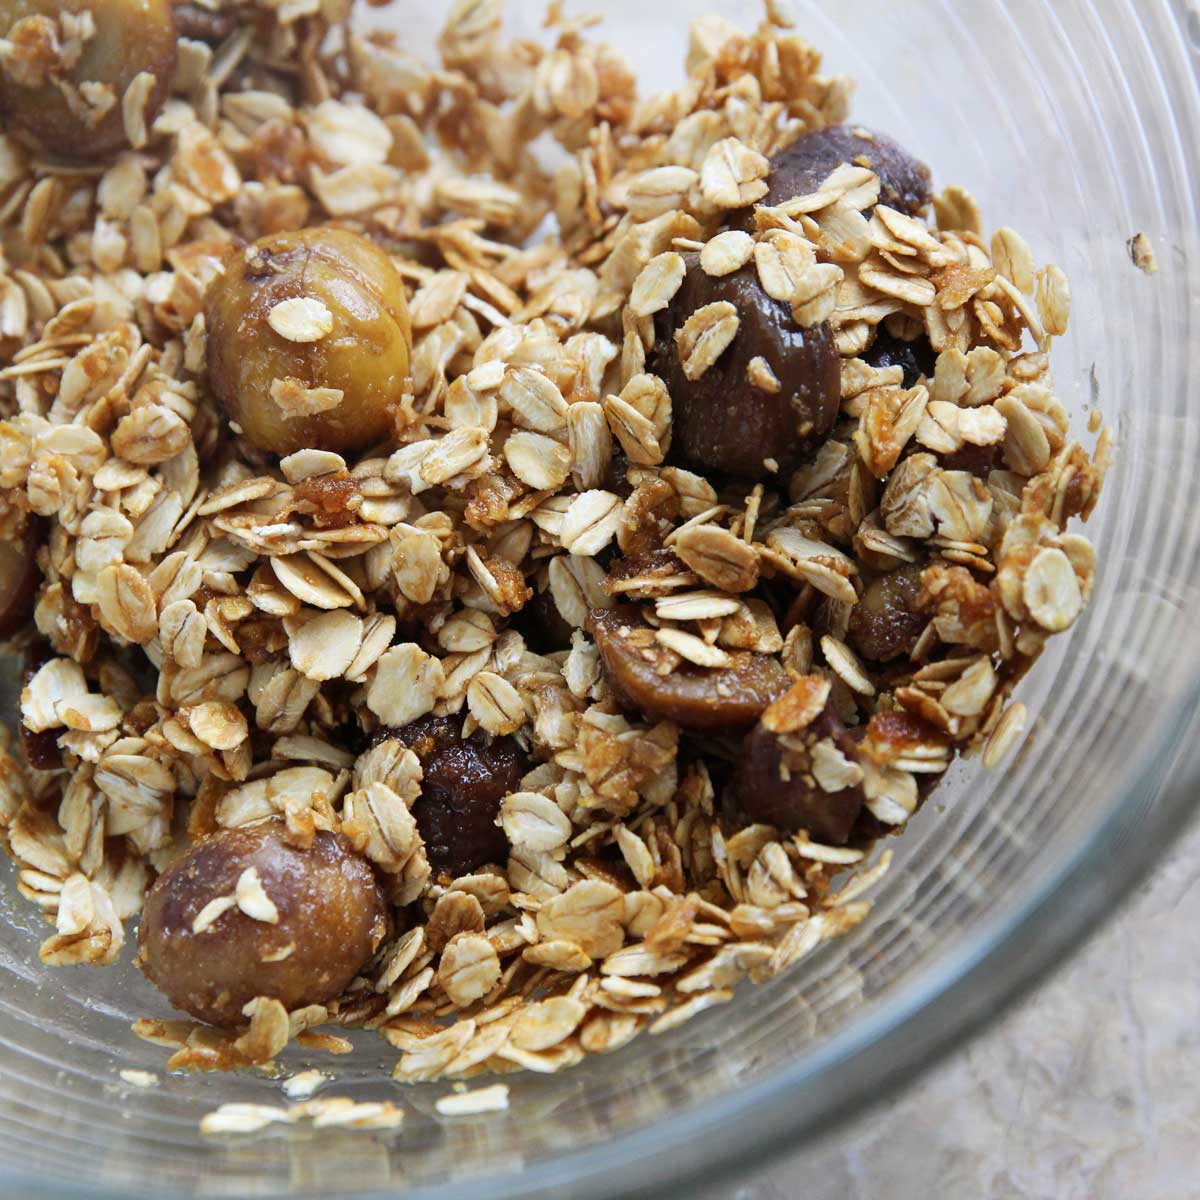 Mix all the granola ingredients together including Chestnut and soy sauce